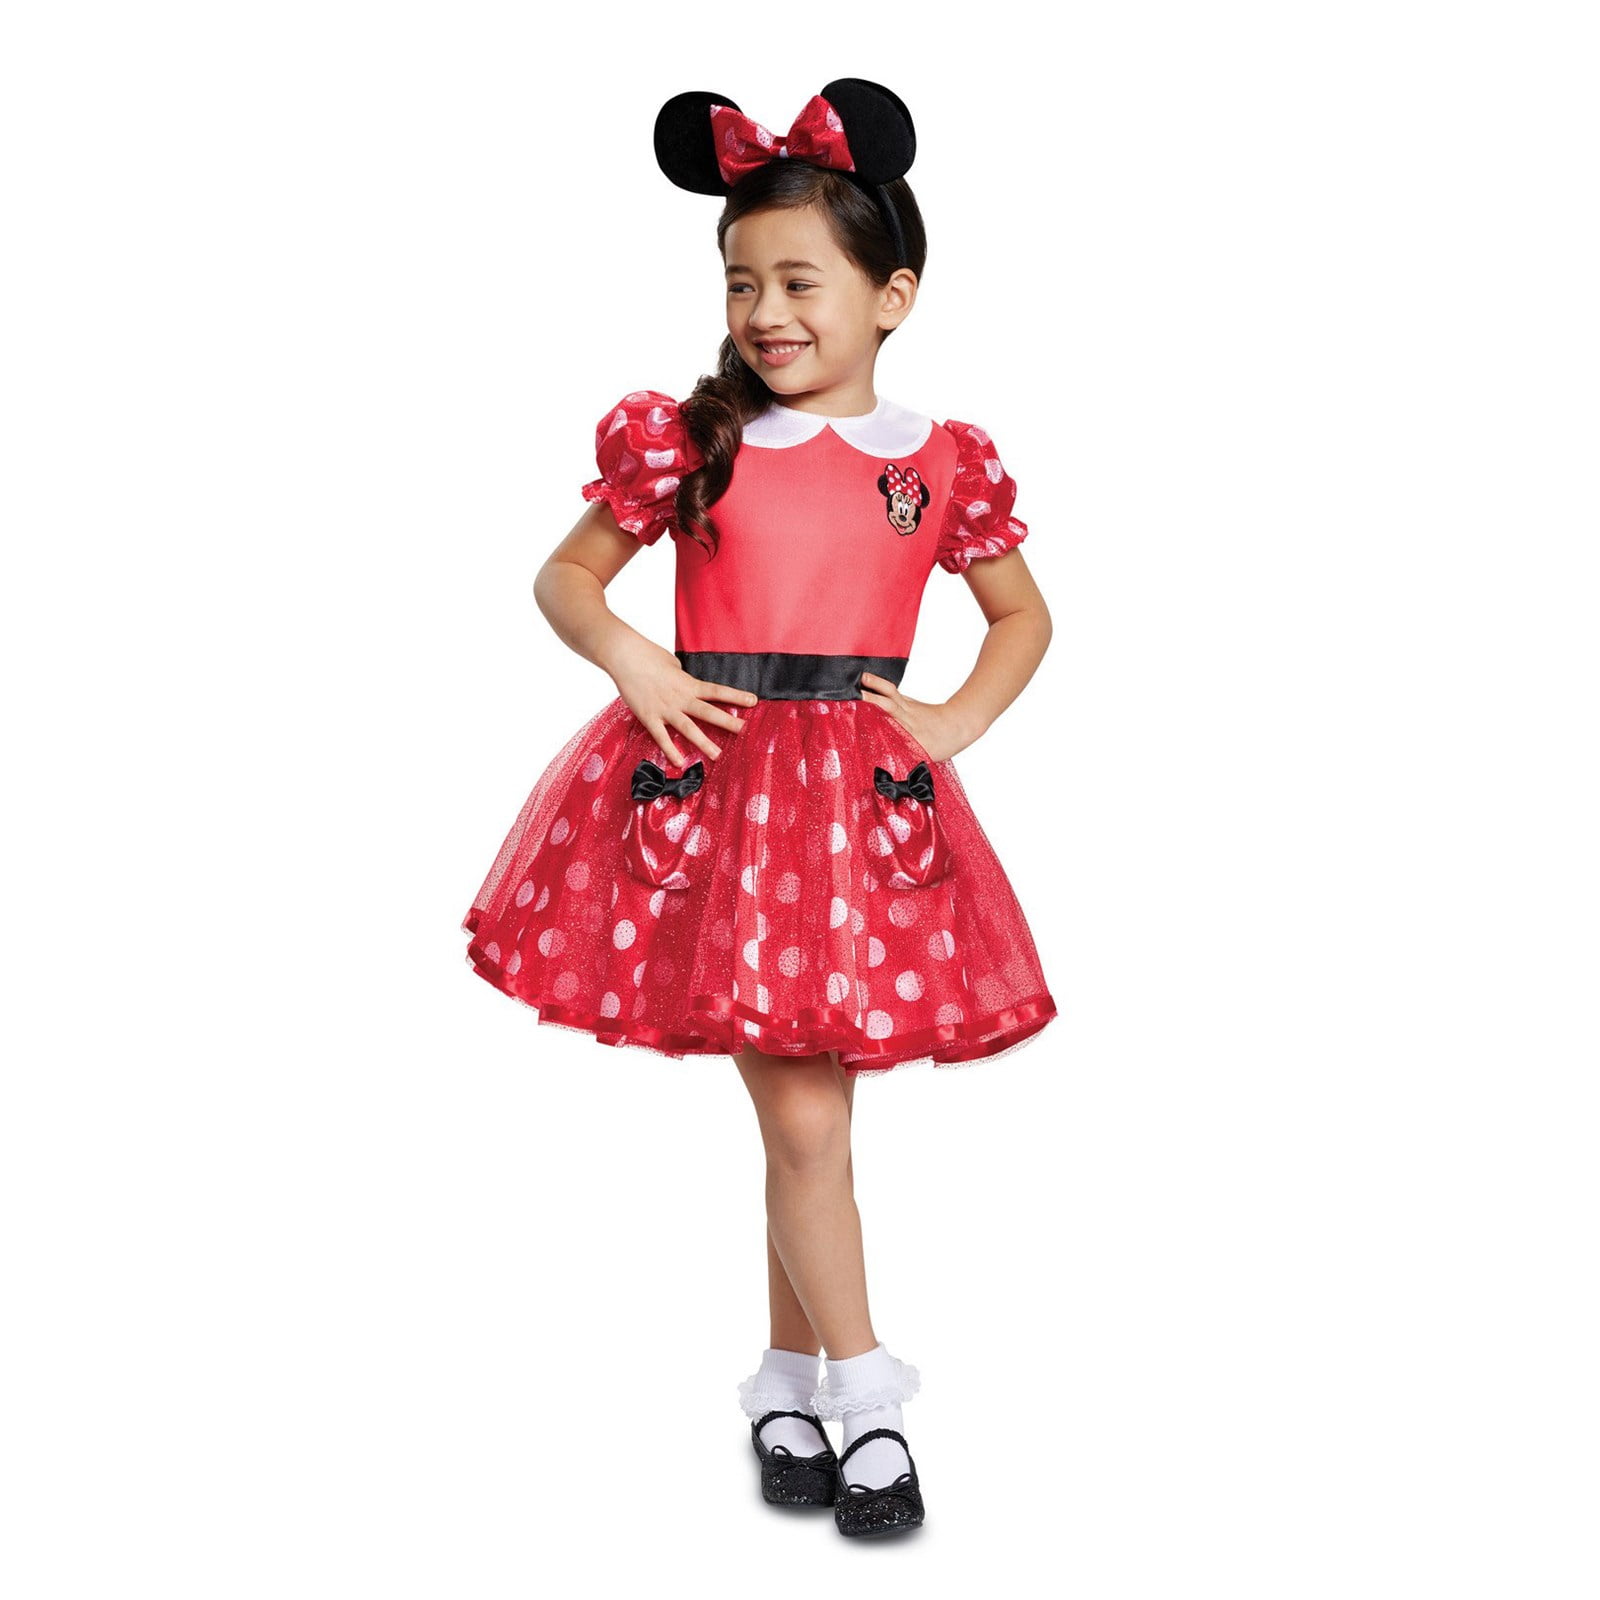 Red Minnie Mouse Toddler Halloween Costume - Walmart.com